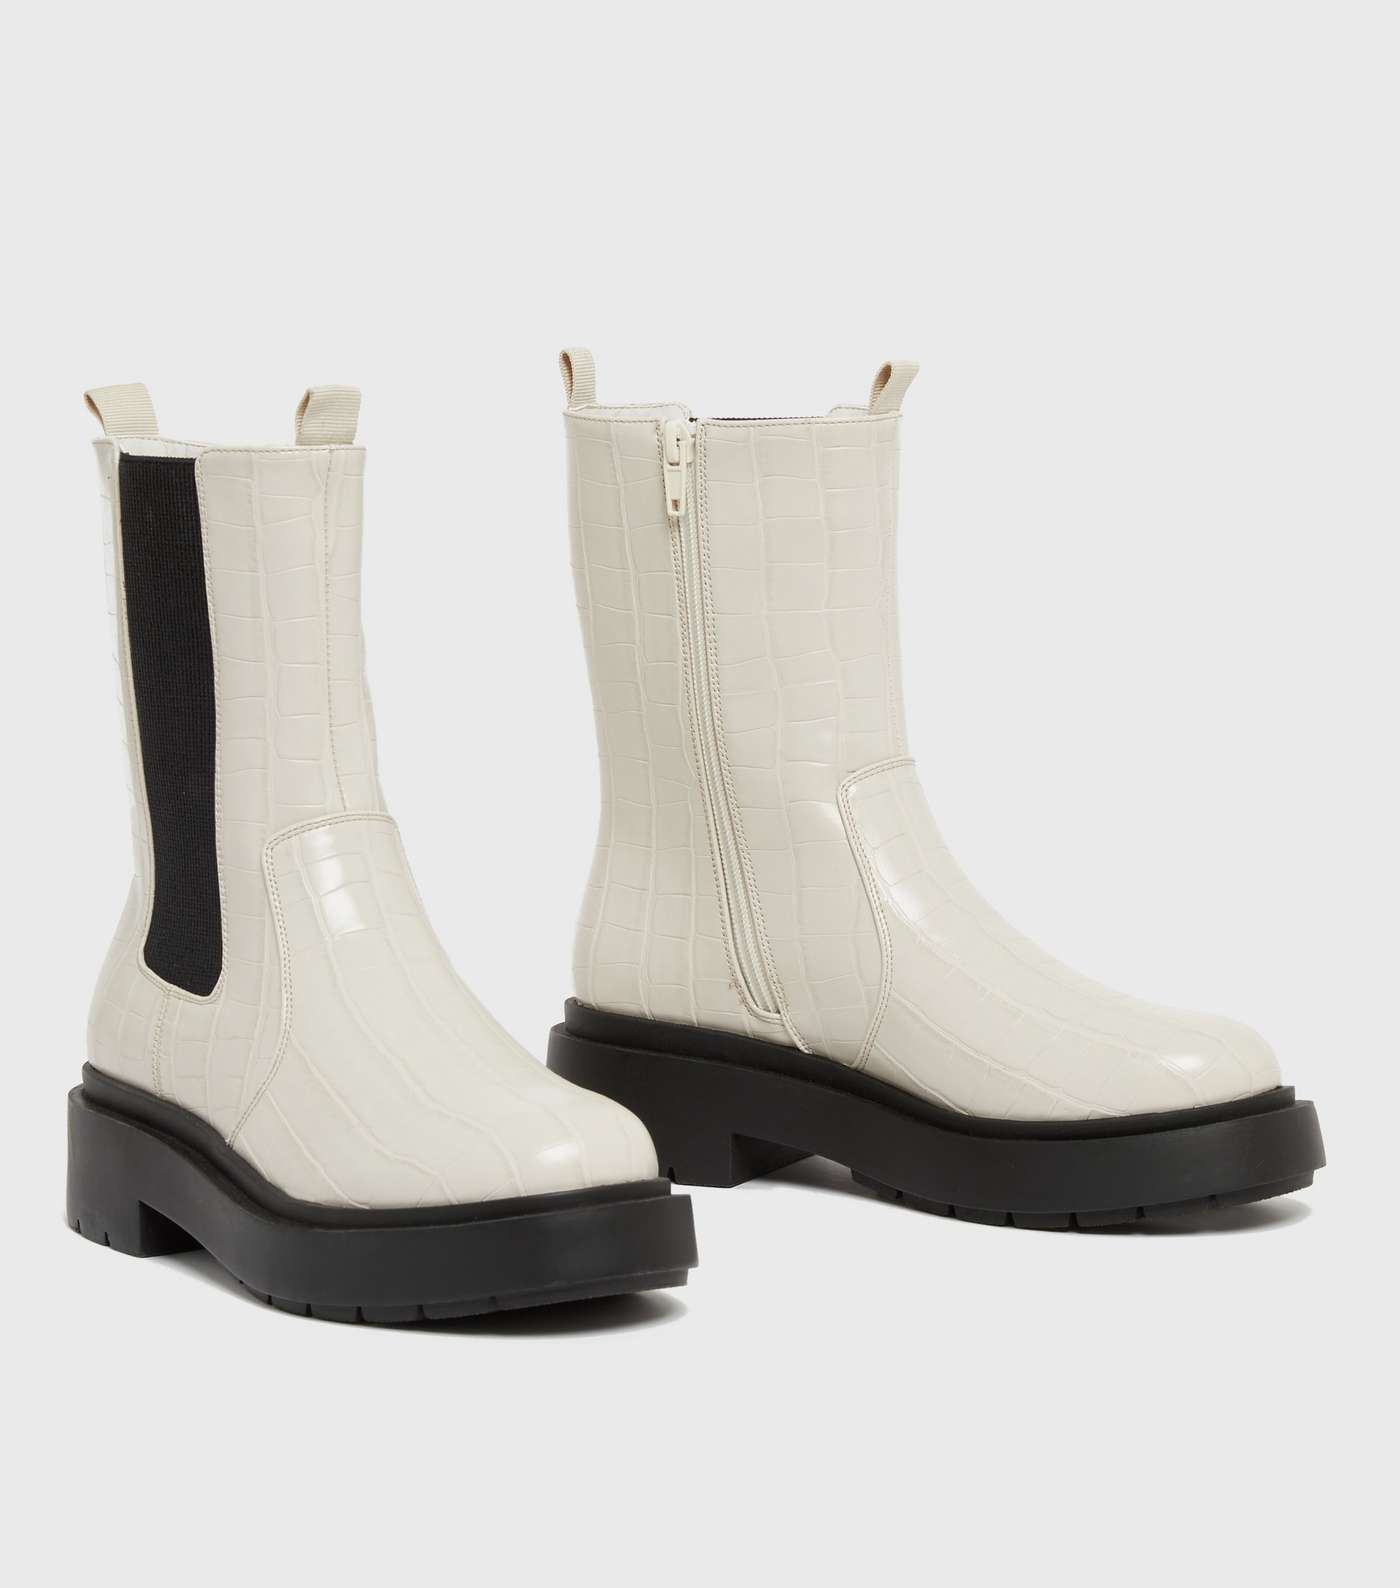 Off White Faux Croc Chunky High Ankle Boots Image 3